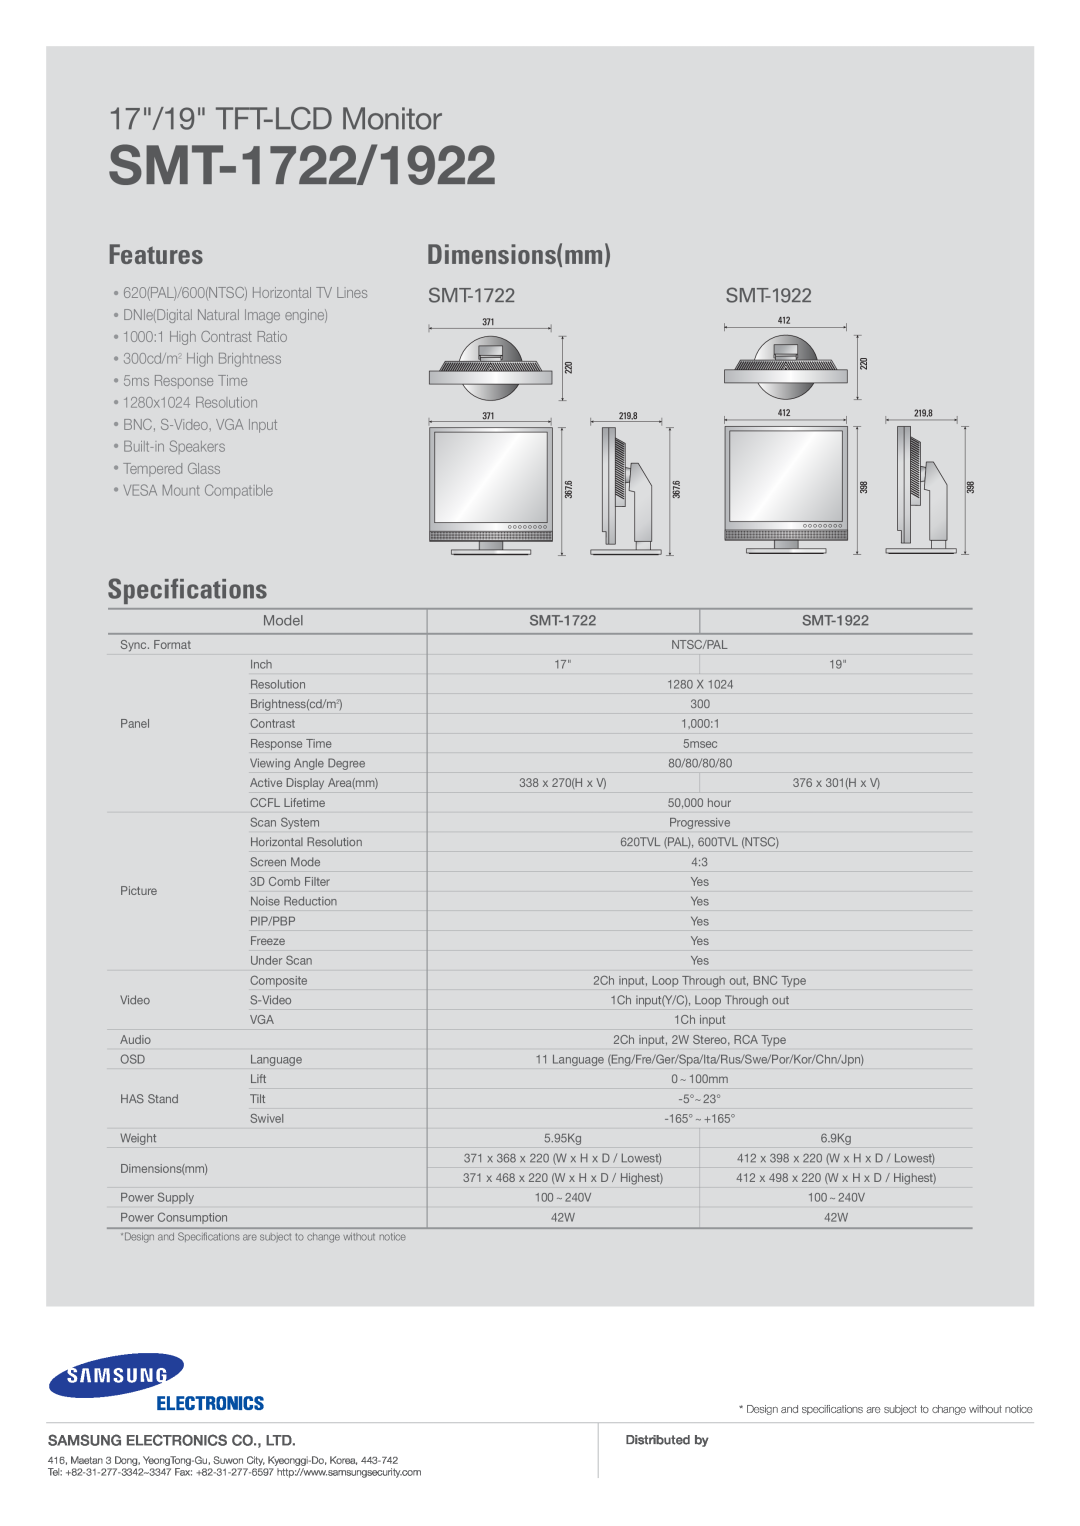 Samsung specifications SMT-1722/1922, 17/19 TFT-LCD Monitor, FeaturesDimensionsmm, Specifications, SMT-1722SMT-1922 